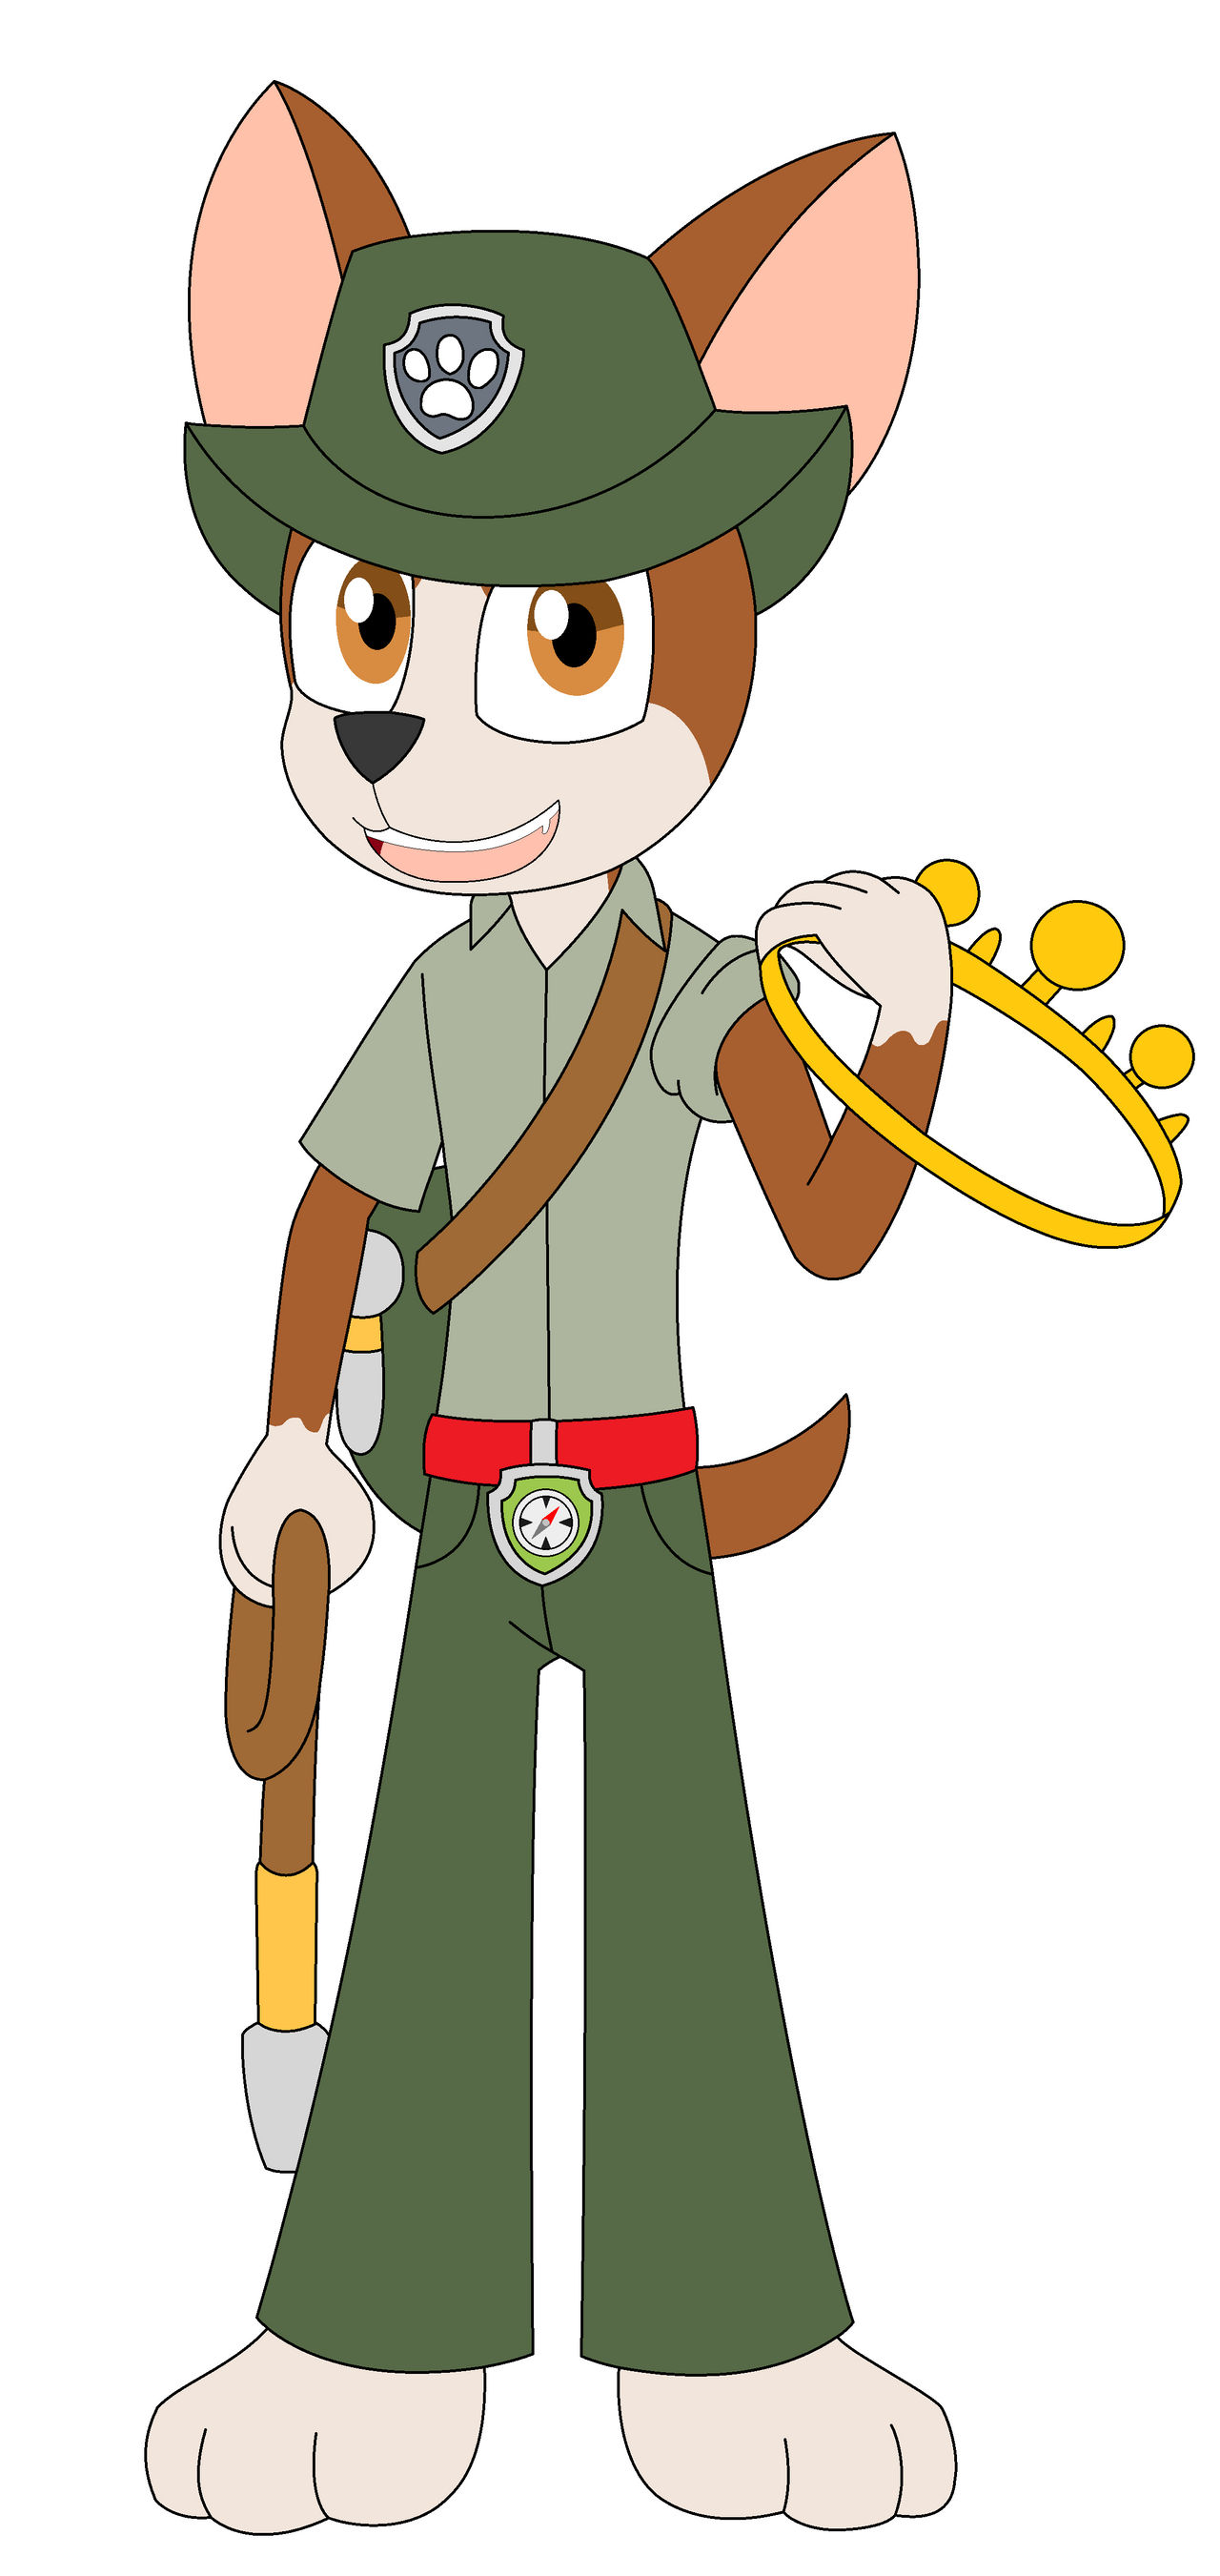 PAW Patrol - Tracker the Jungle Pup Anthro Form by PAWPatrolUCS2019 on DeviantArt